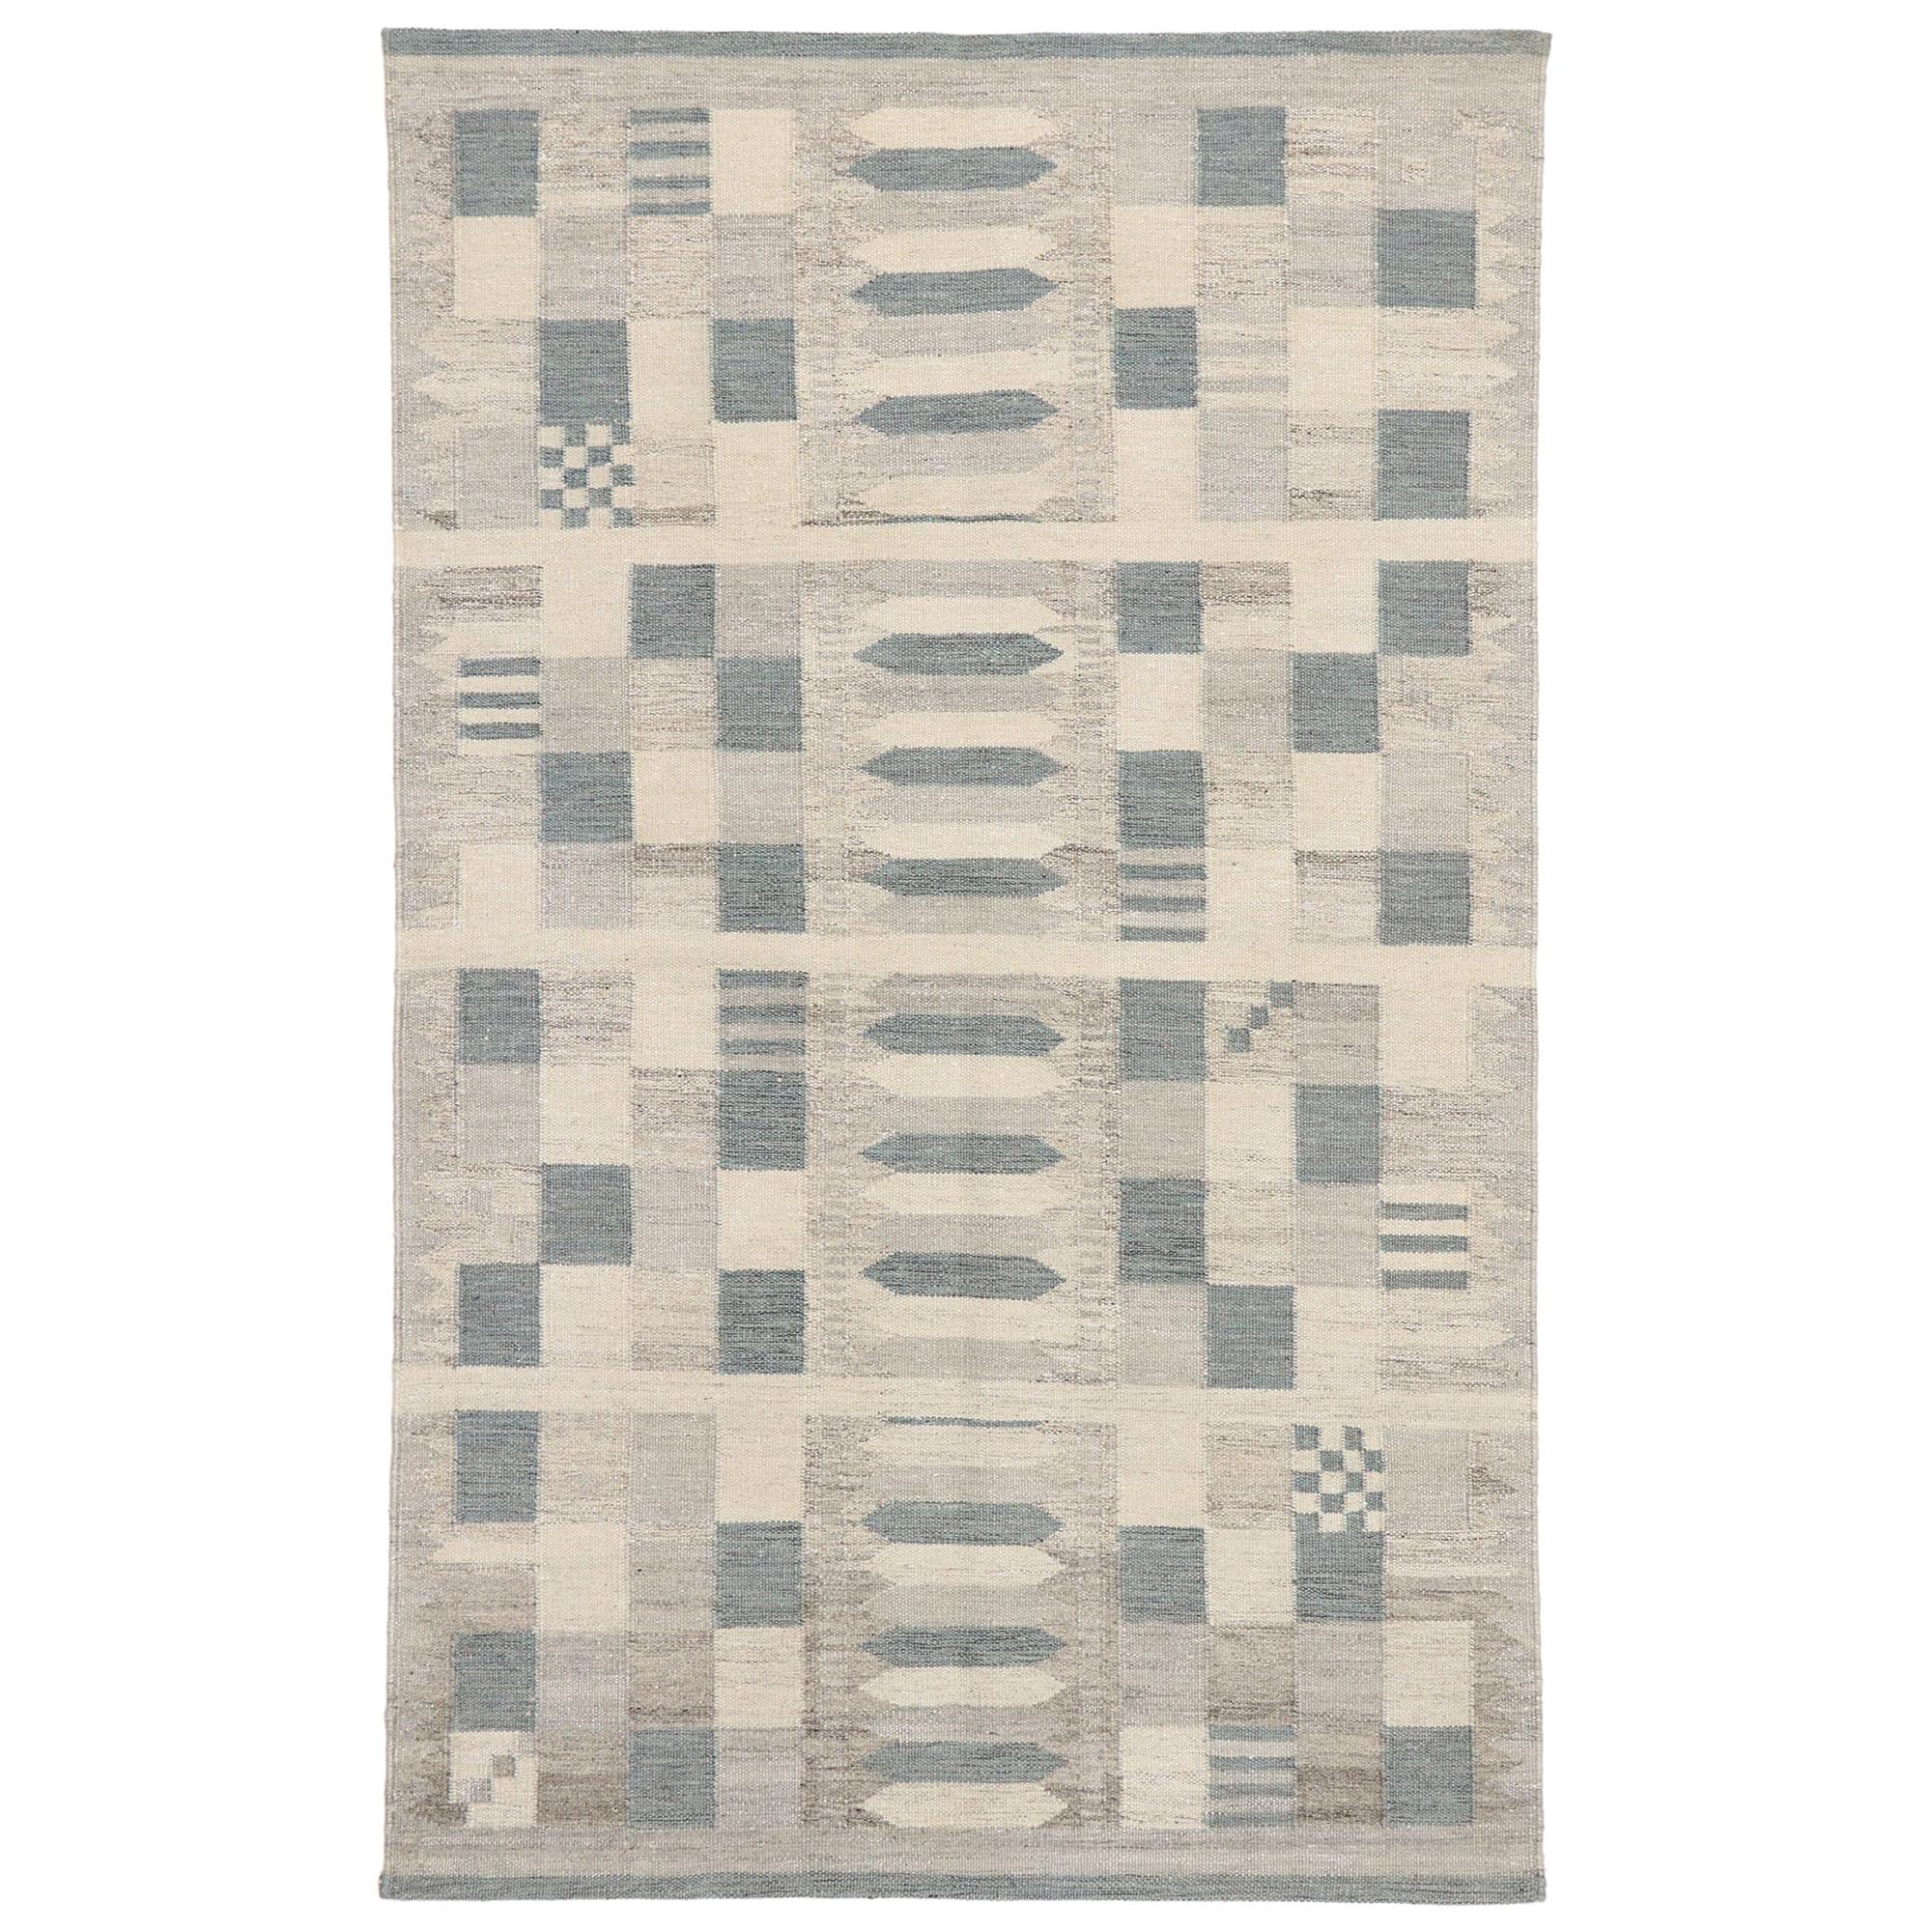 New Contemporary Swedish Inspired Kilim Rug with Scandinavian Modern Style For Sale